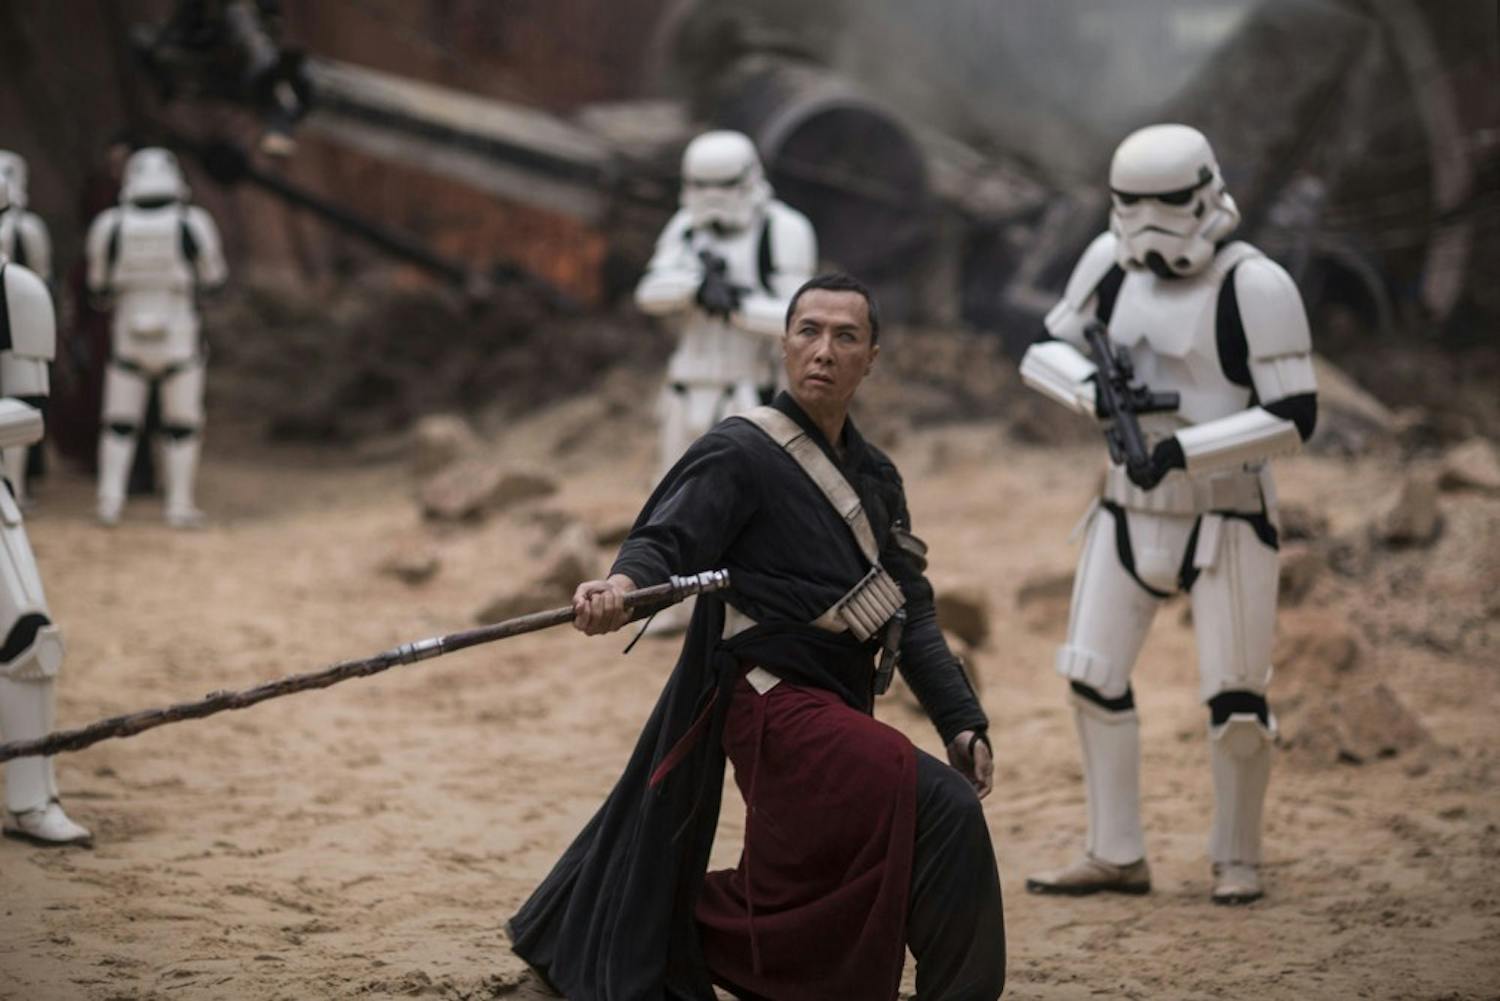 Donnie Yen as Chirrut Imwe in the film "Rogue One: A Star Wars Story." (Jonathan Olley/Lucasfilm Ltd.)